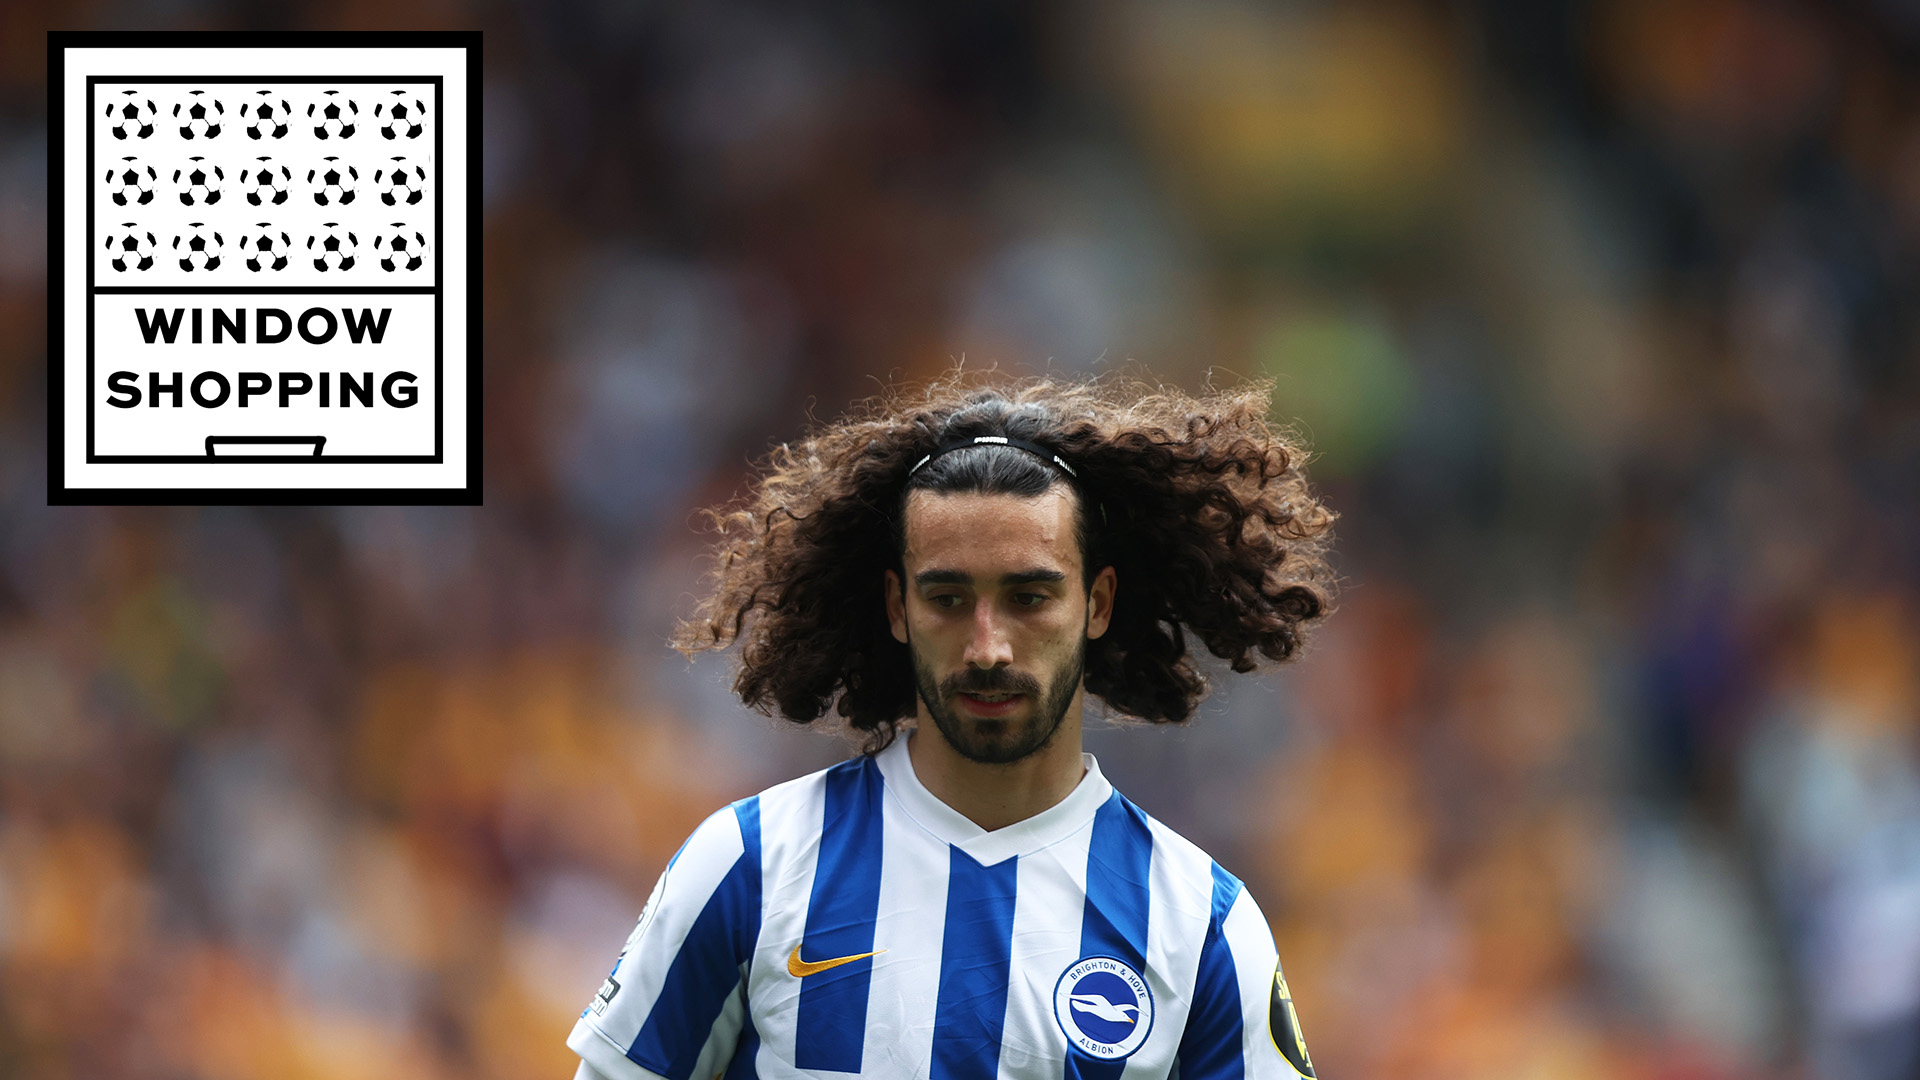 Marc Cucurella of Brighton & Hove Albion in action during the Premier League match between Wolverhampton Wanderers and Brighton & Hove Albion at Molineux on April 30, 2022 in Wolverhampton, England.